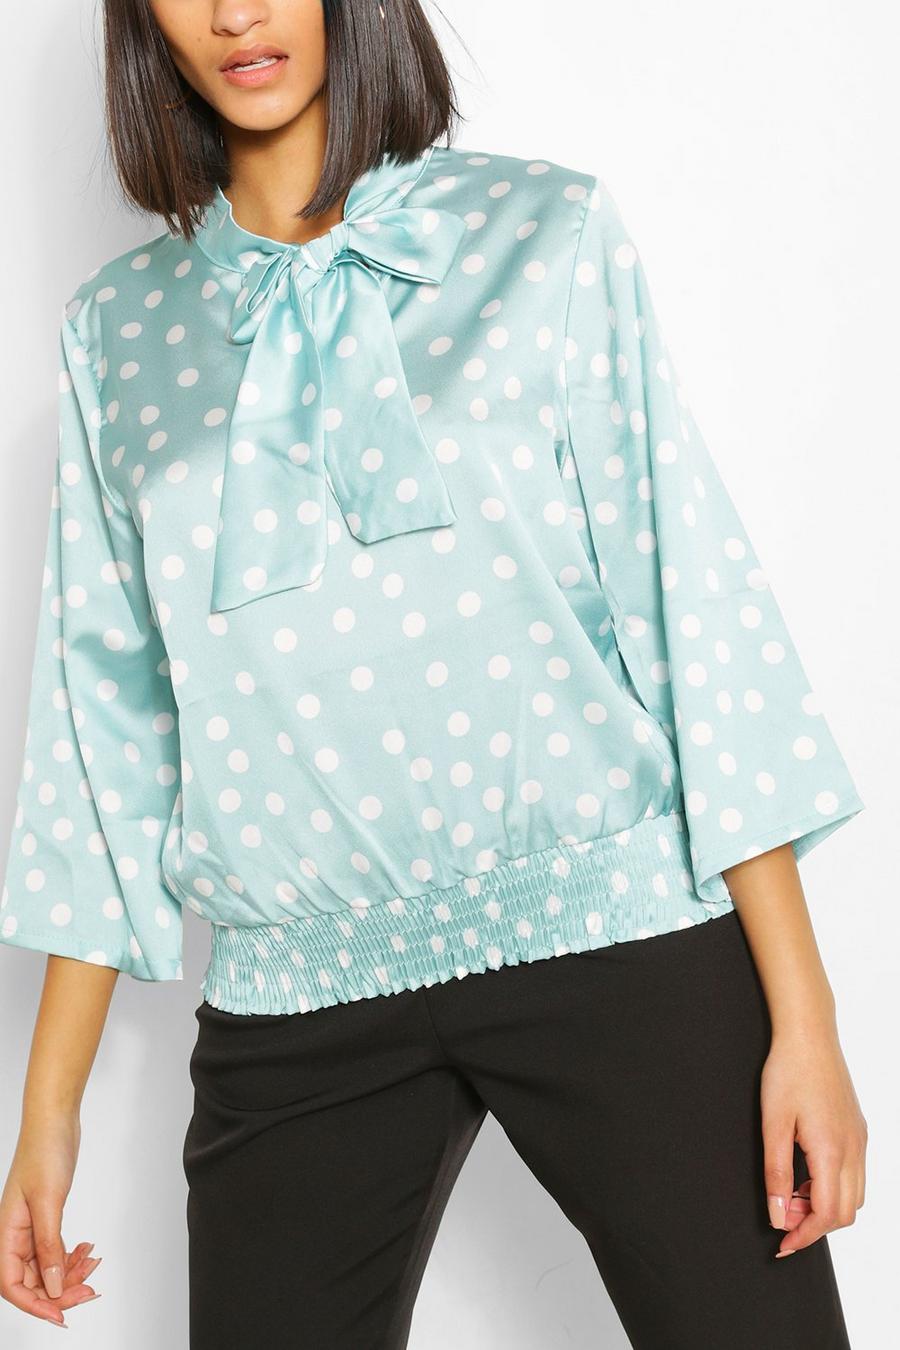 Mint Satin Polka Dot Pussybow Blouse image number 1